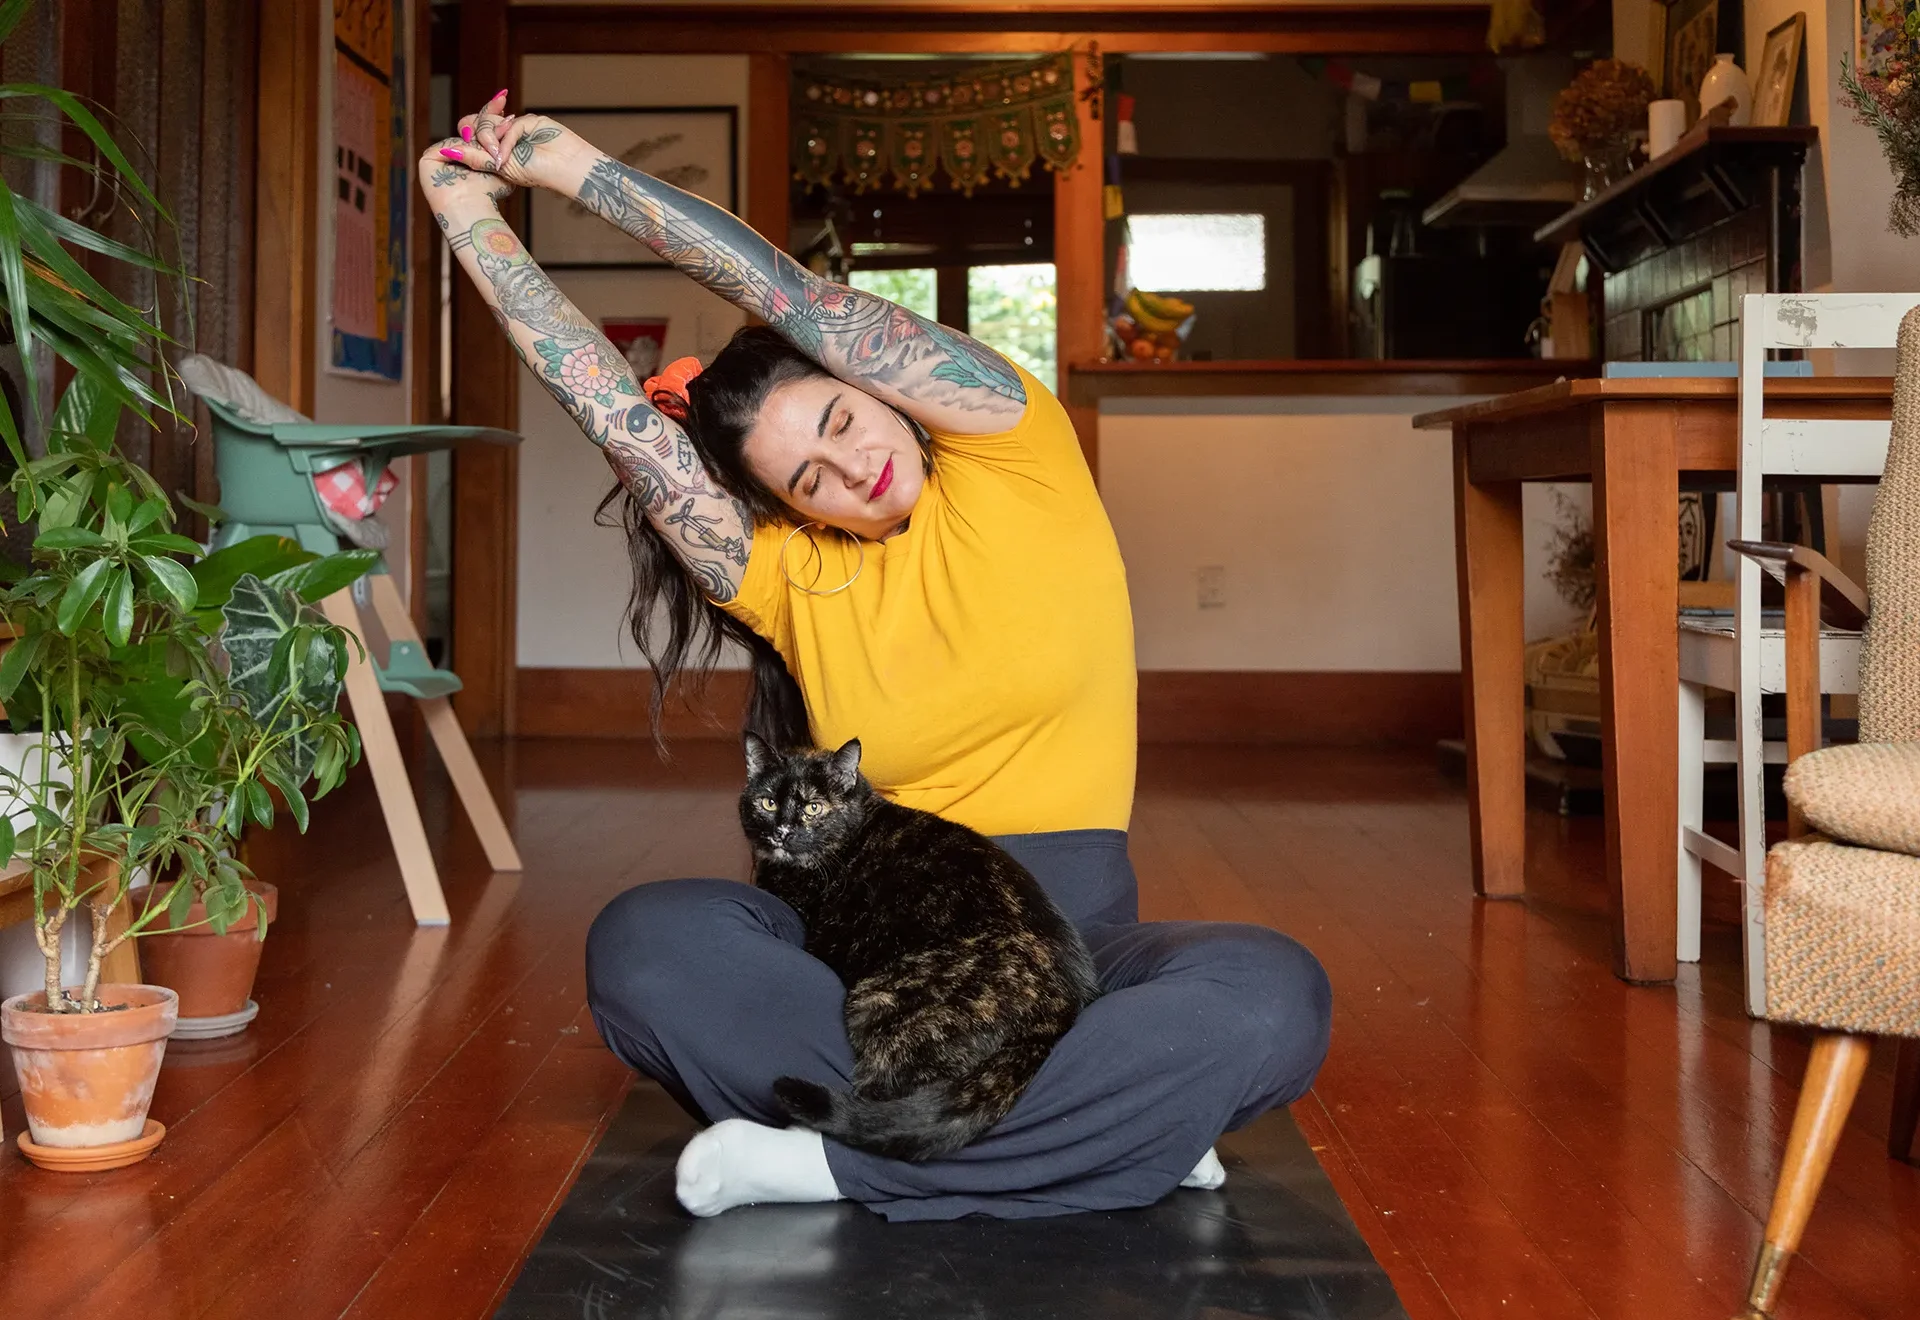 Woman sitting cross legged on a yoga mat indoors stretching her arms up in the air while a cat sits on her lap